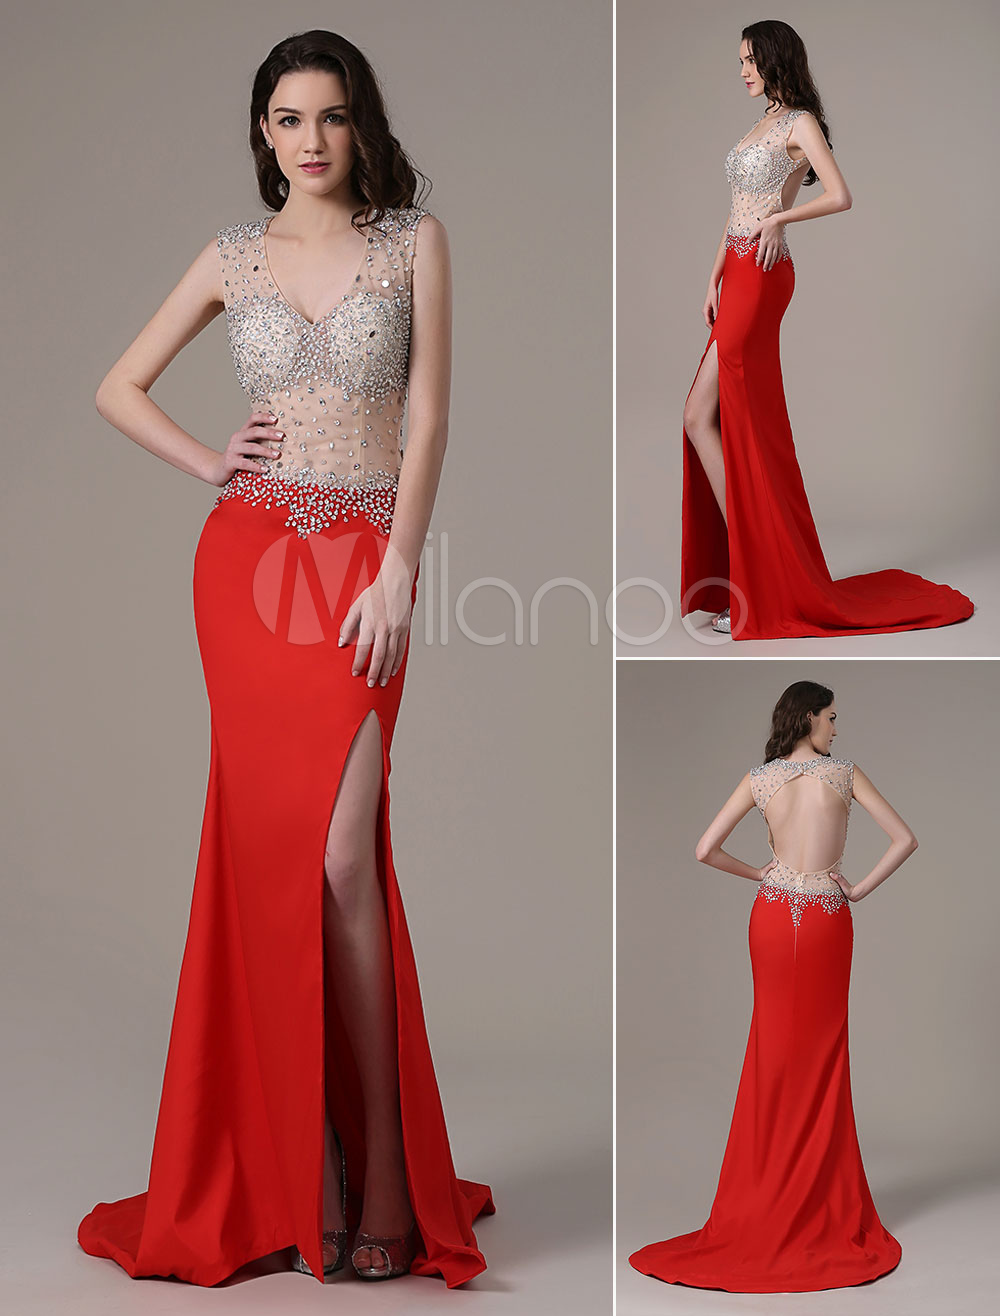 Red Prom Dresses 2020 Long Mermaid Backless Evening Dress See